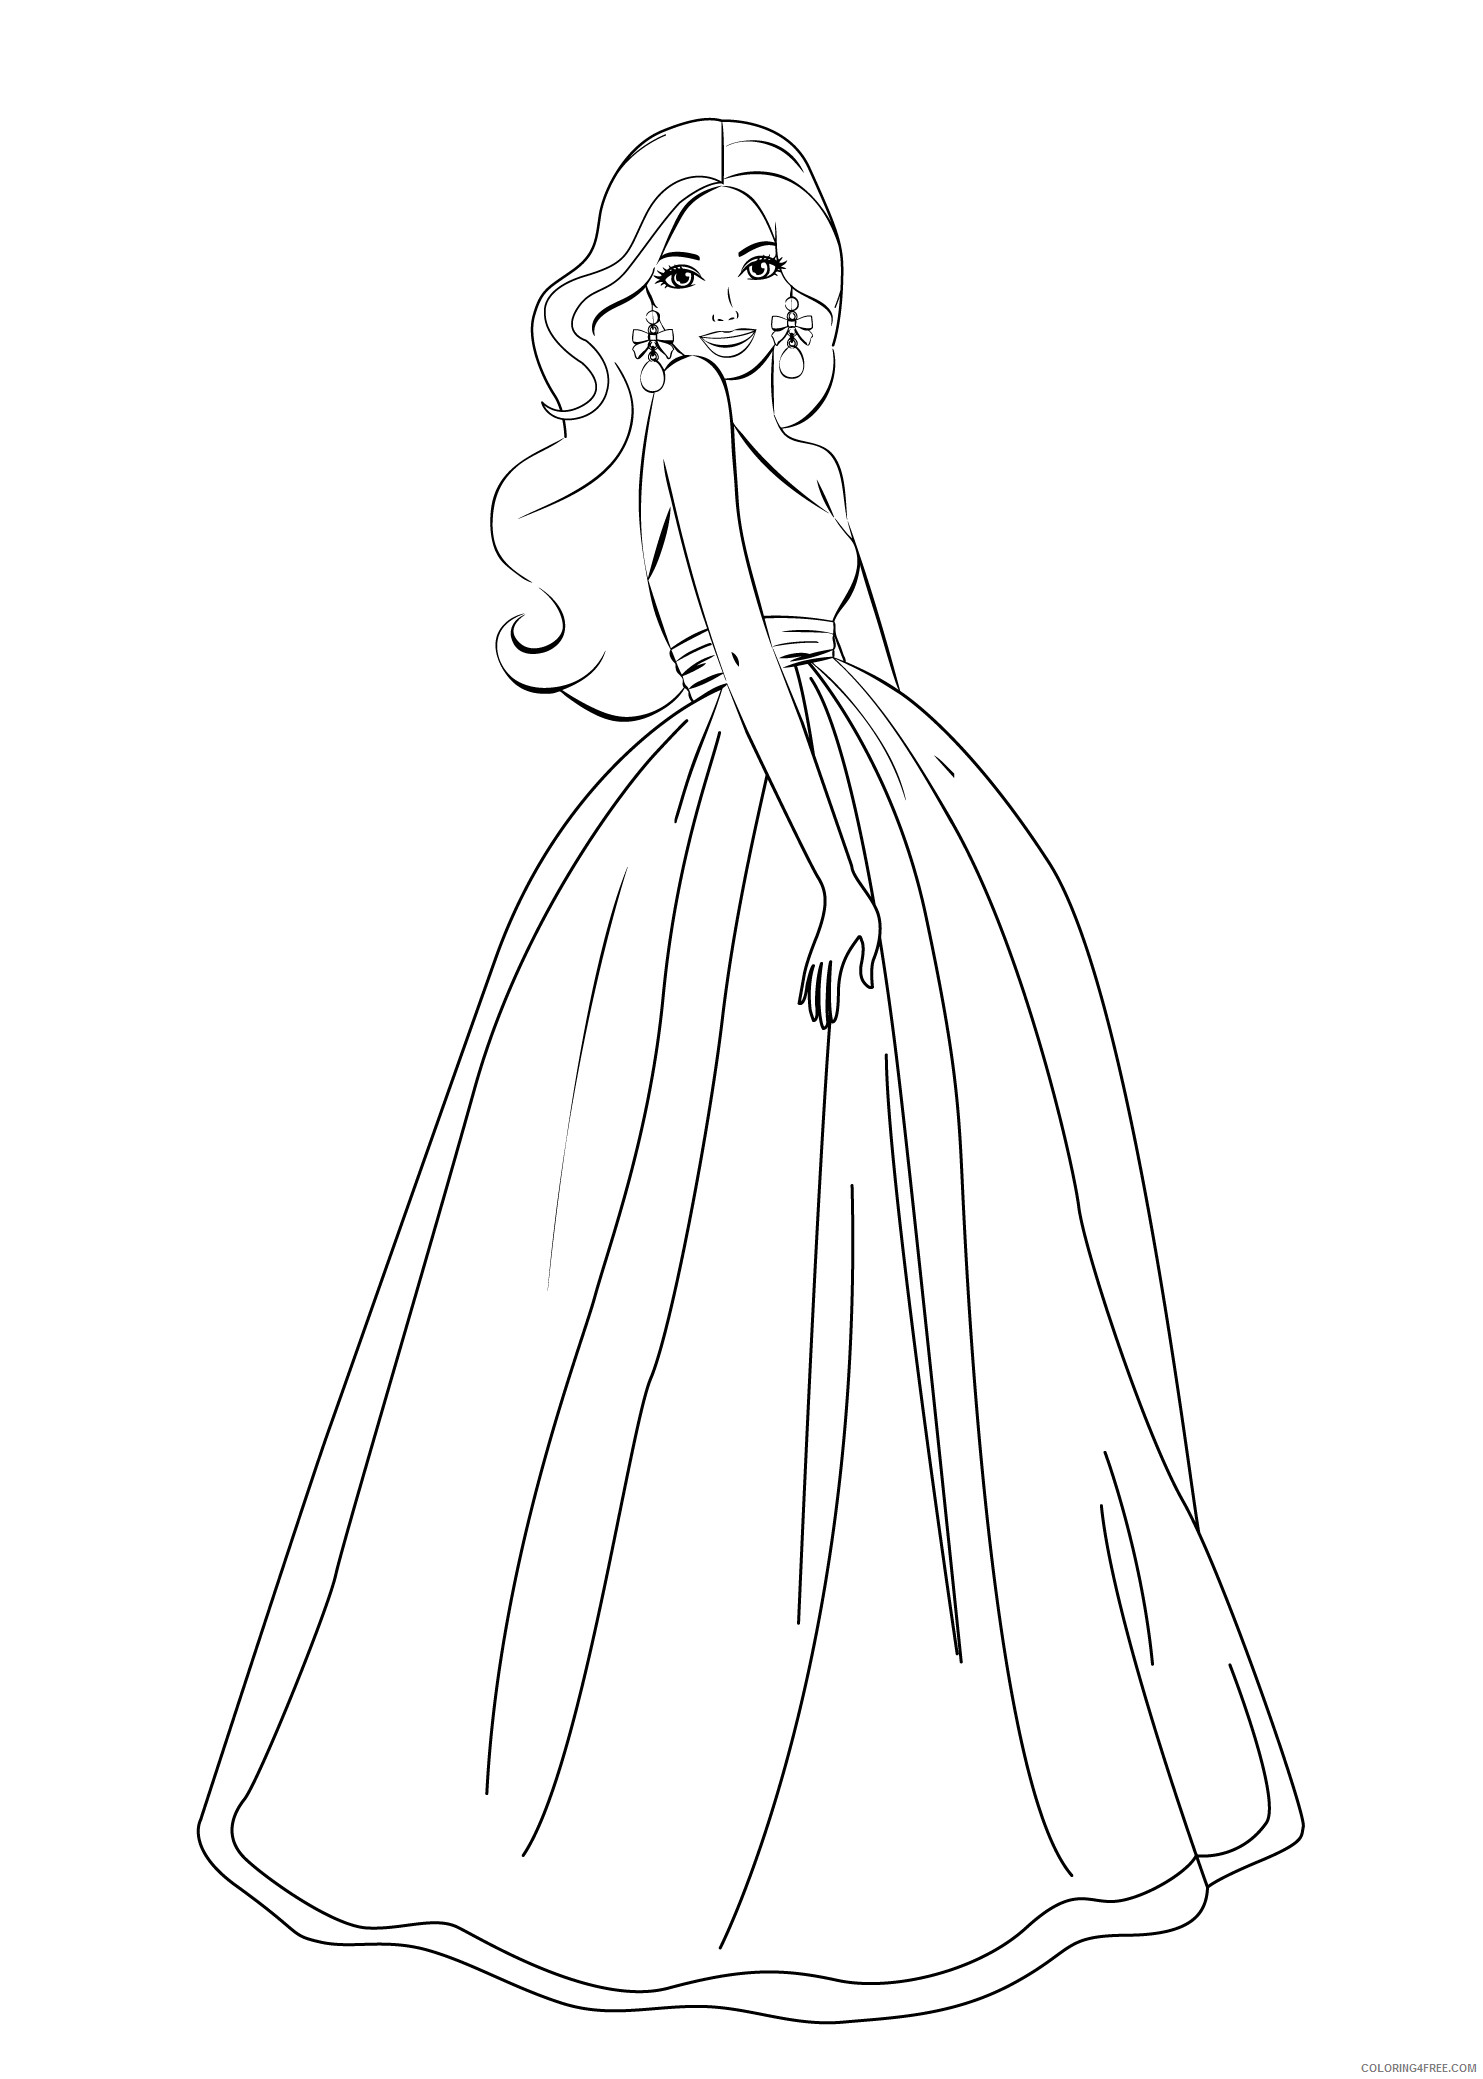 Barbie Coloring Pages Barbie Princess Gown 1 Printable 2021 0598 Coloring4free